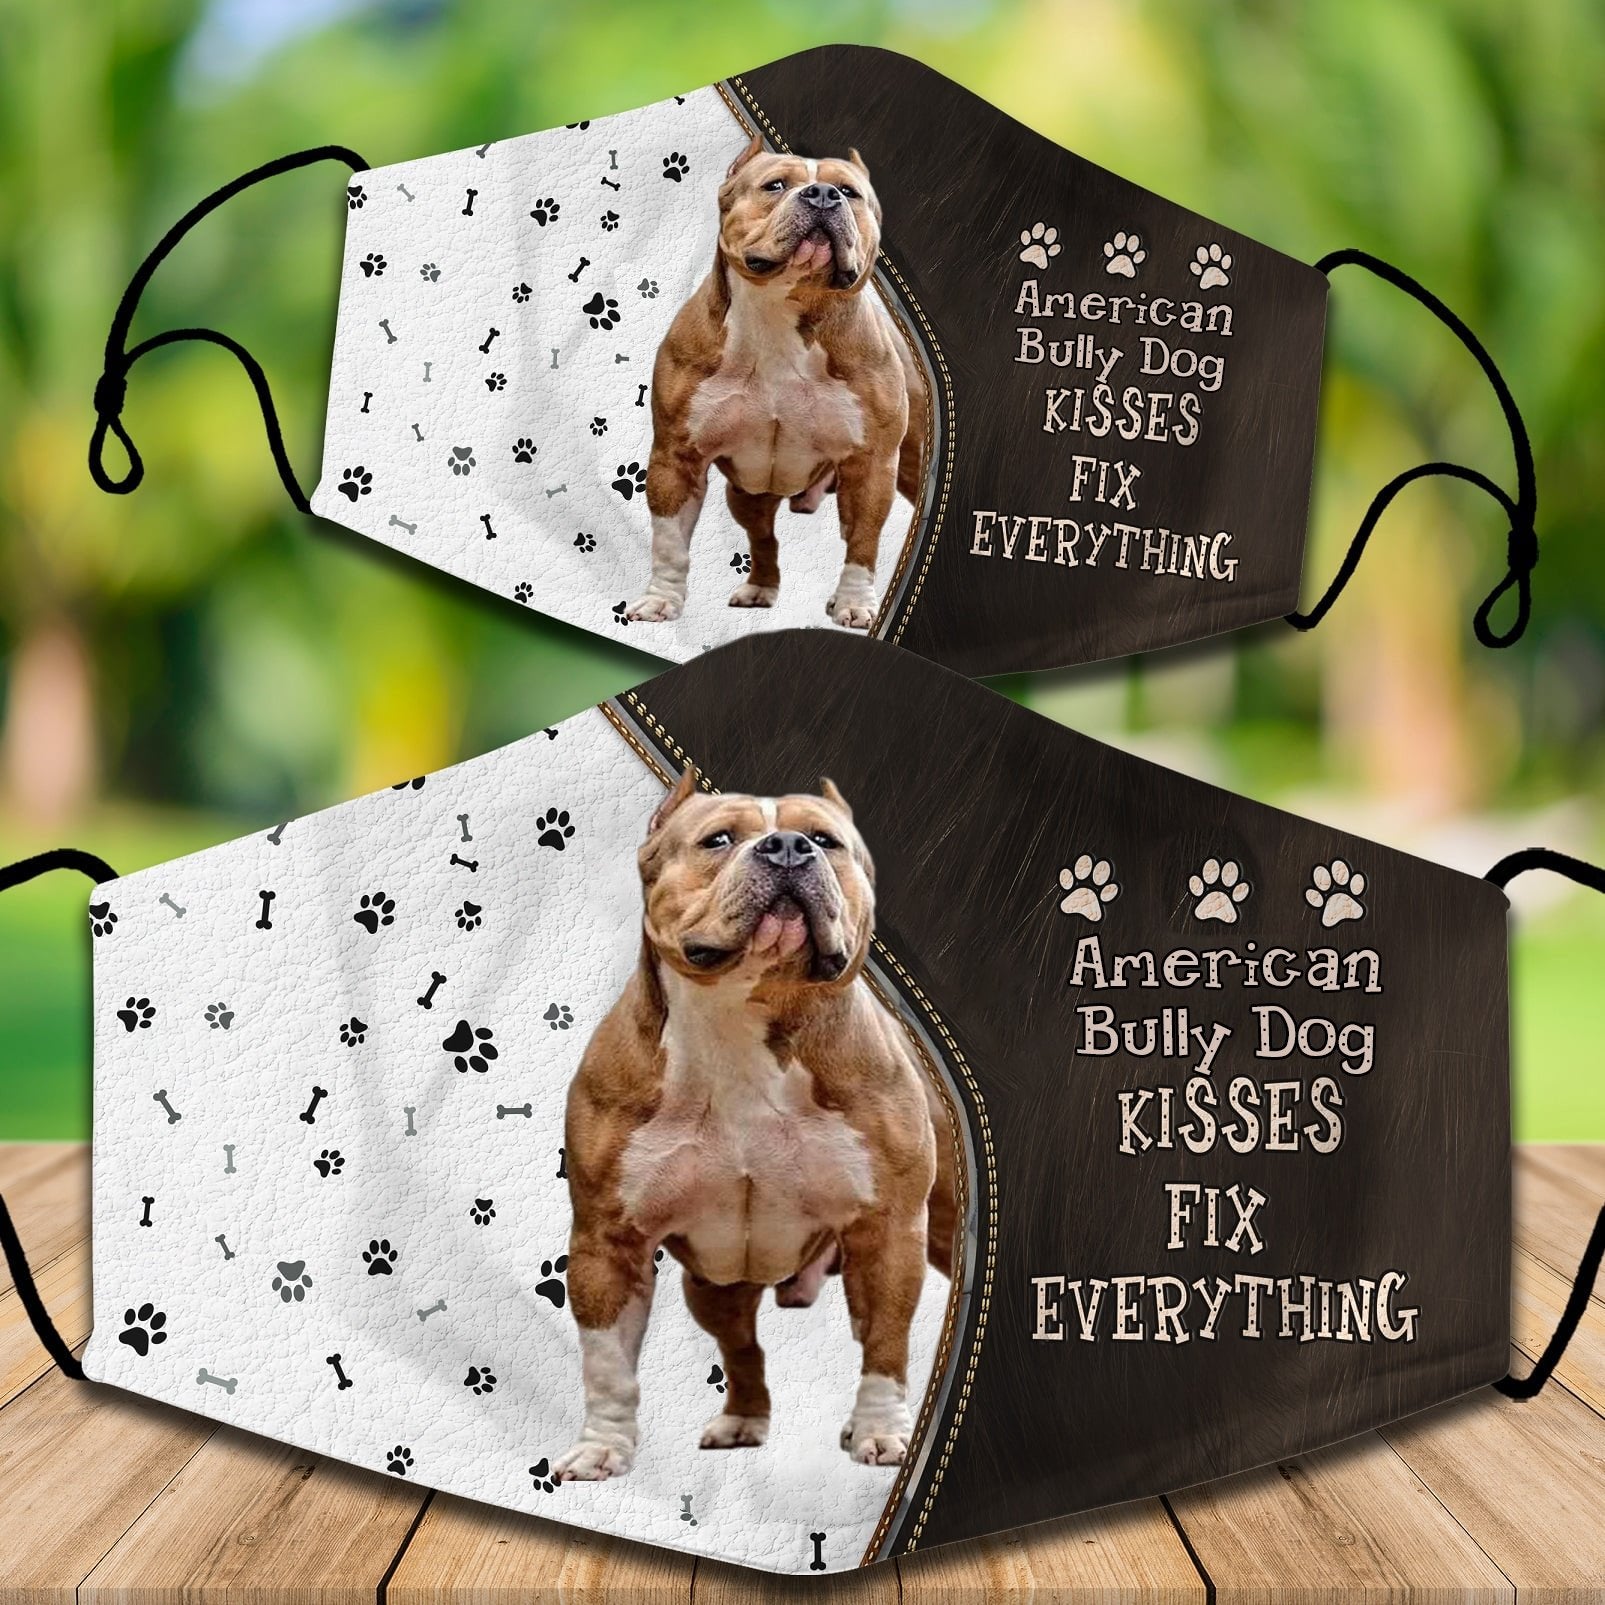 American Bully Dog Kisses Fix Everything Veil